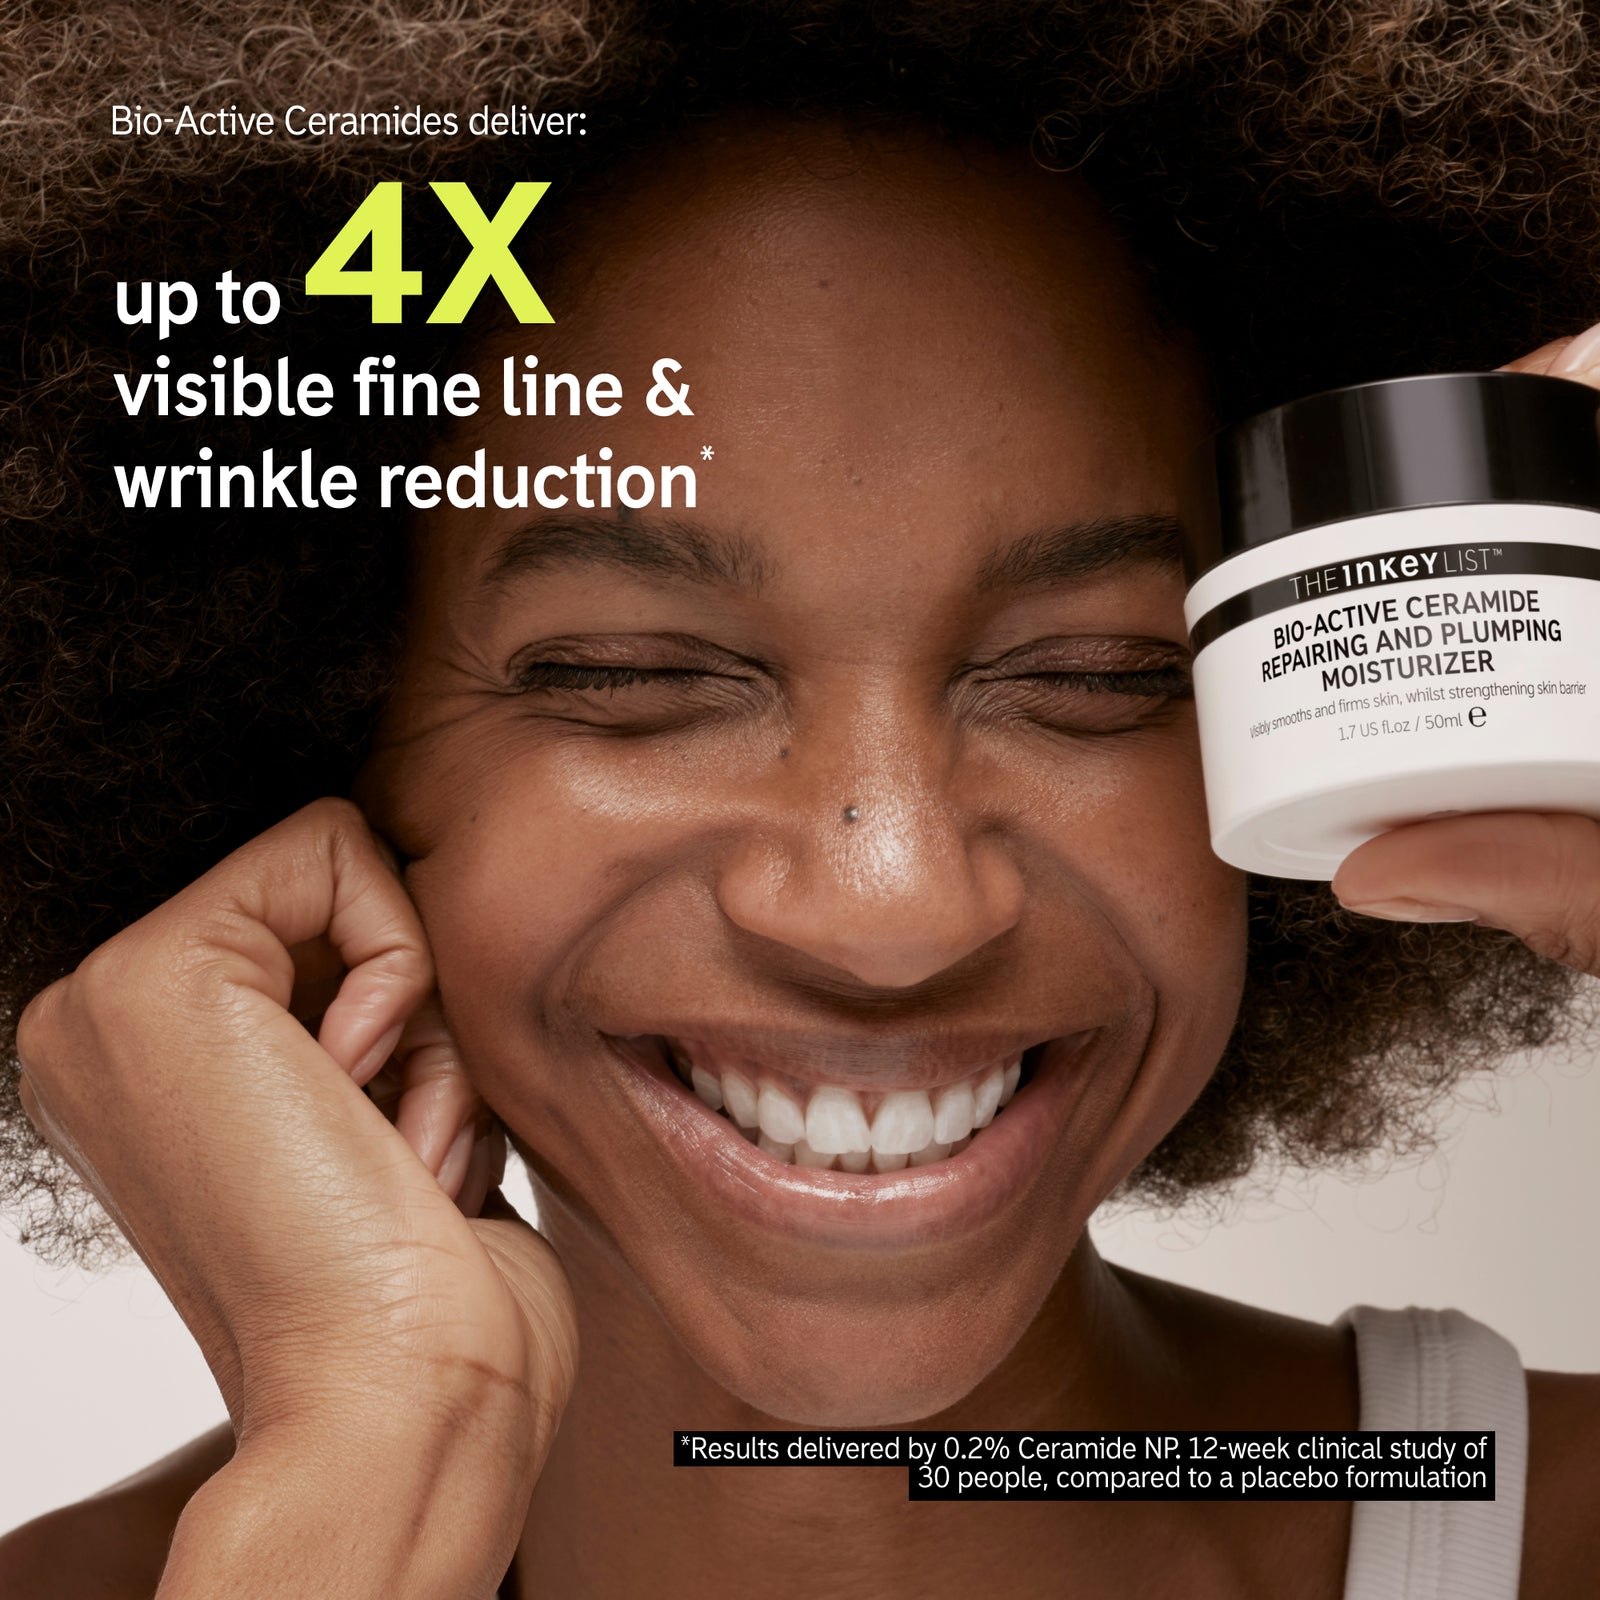 Infographic: Up to 4x visible fine line and wrinkle reduction